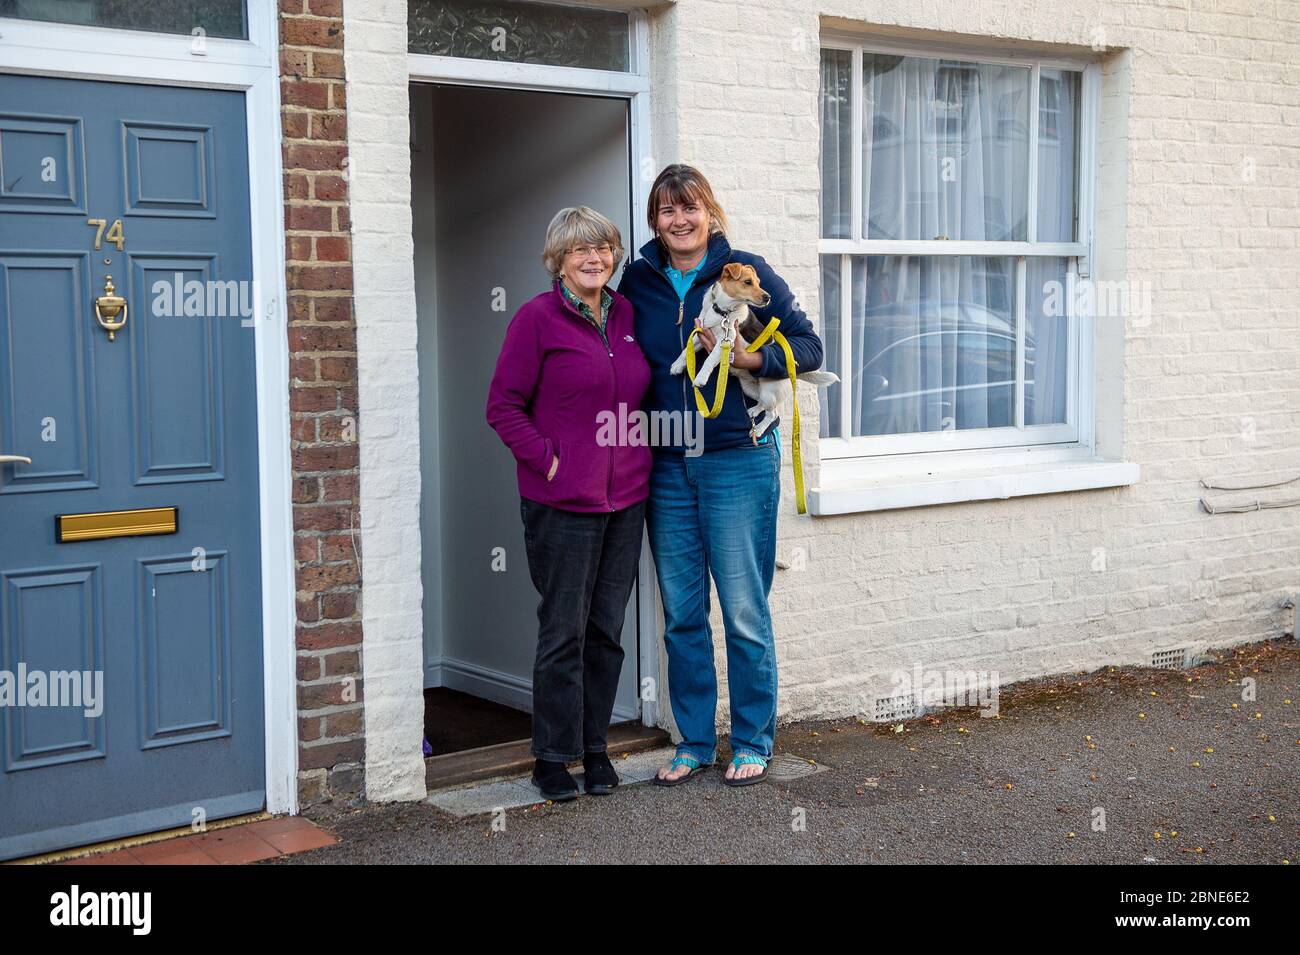 Windsor, Berkshire, UK. 14th May, 2020. Clap for Carers brought residents in the streets of Windsor, Berkshire out onto their doorsteps as they showed their appreciation, thanks and good wishes to all our front line NHS heroes caring for Coronavirus Covid-19 patients. Credit: Maureen McLean/Alamy Live News Stock Photo